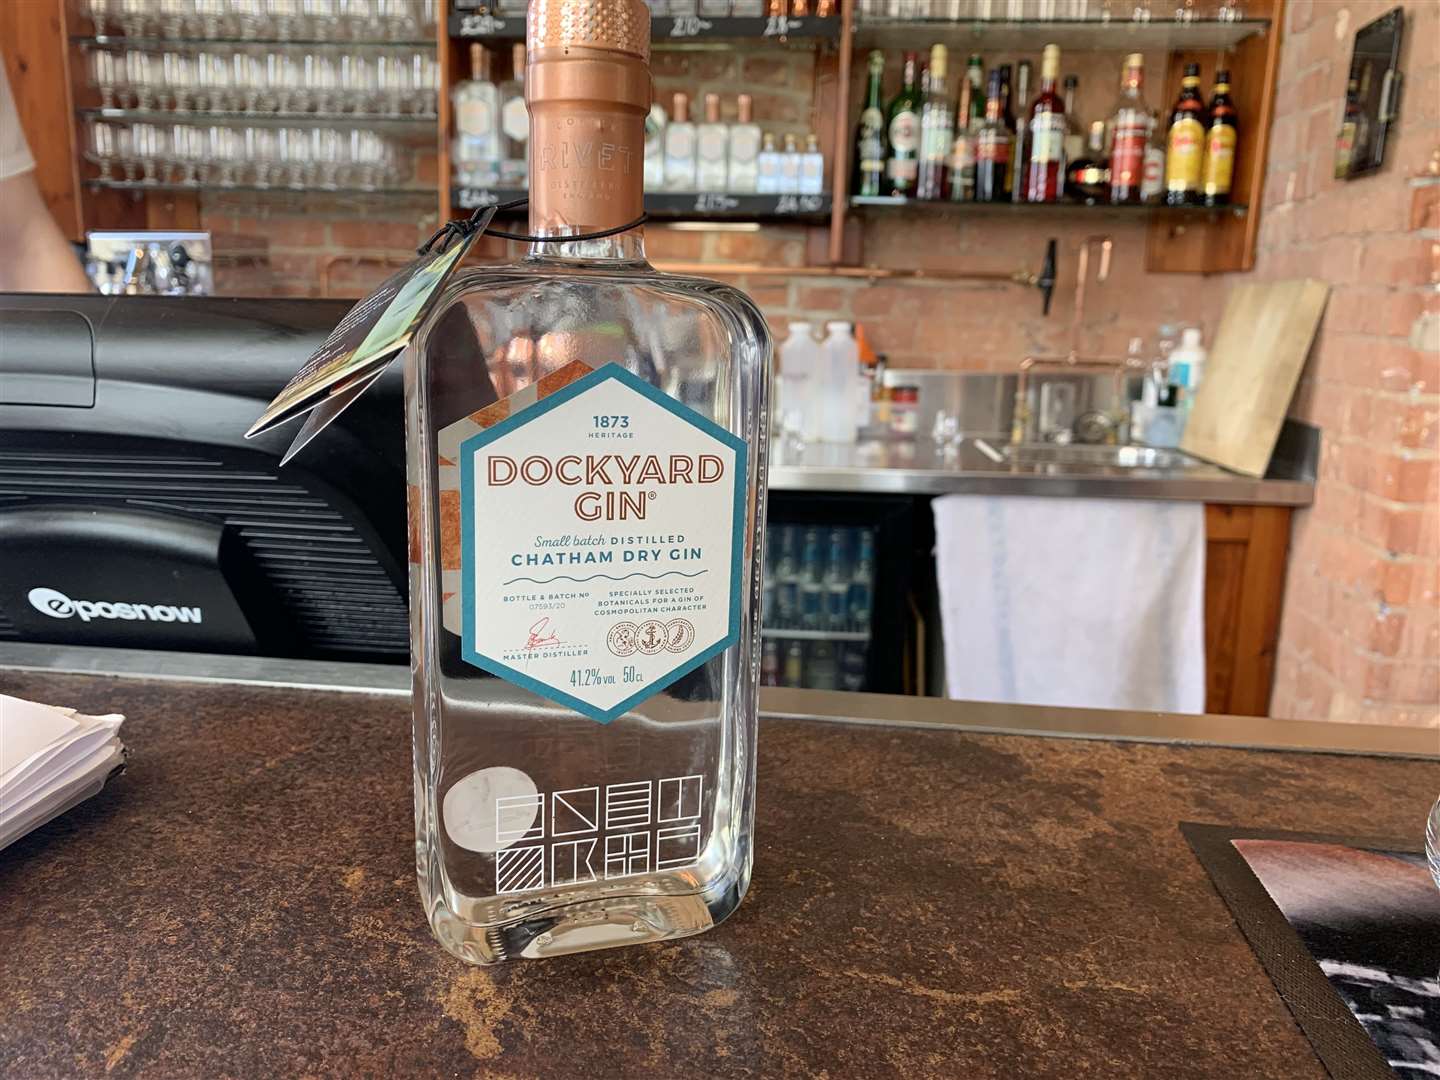 Distillers used to making gin are exploring whether they can make hand sanitiser in the wake of the coronavirus outbreak